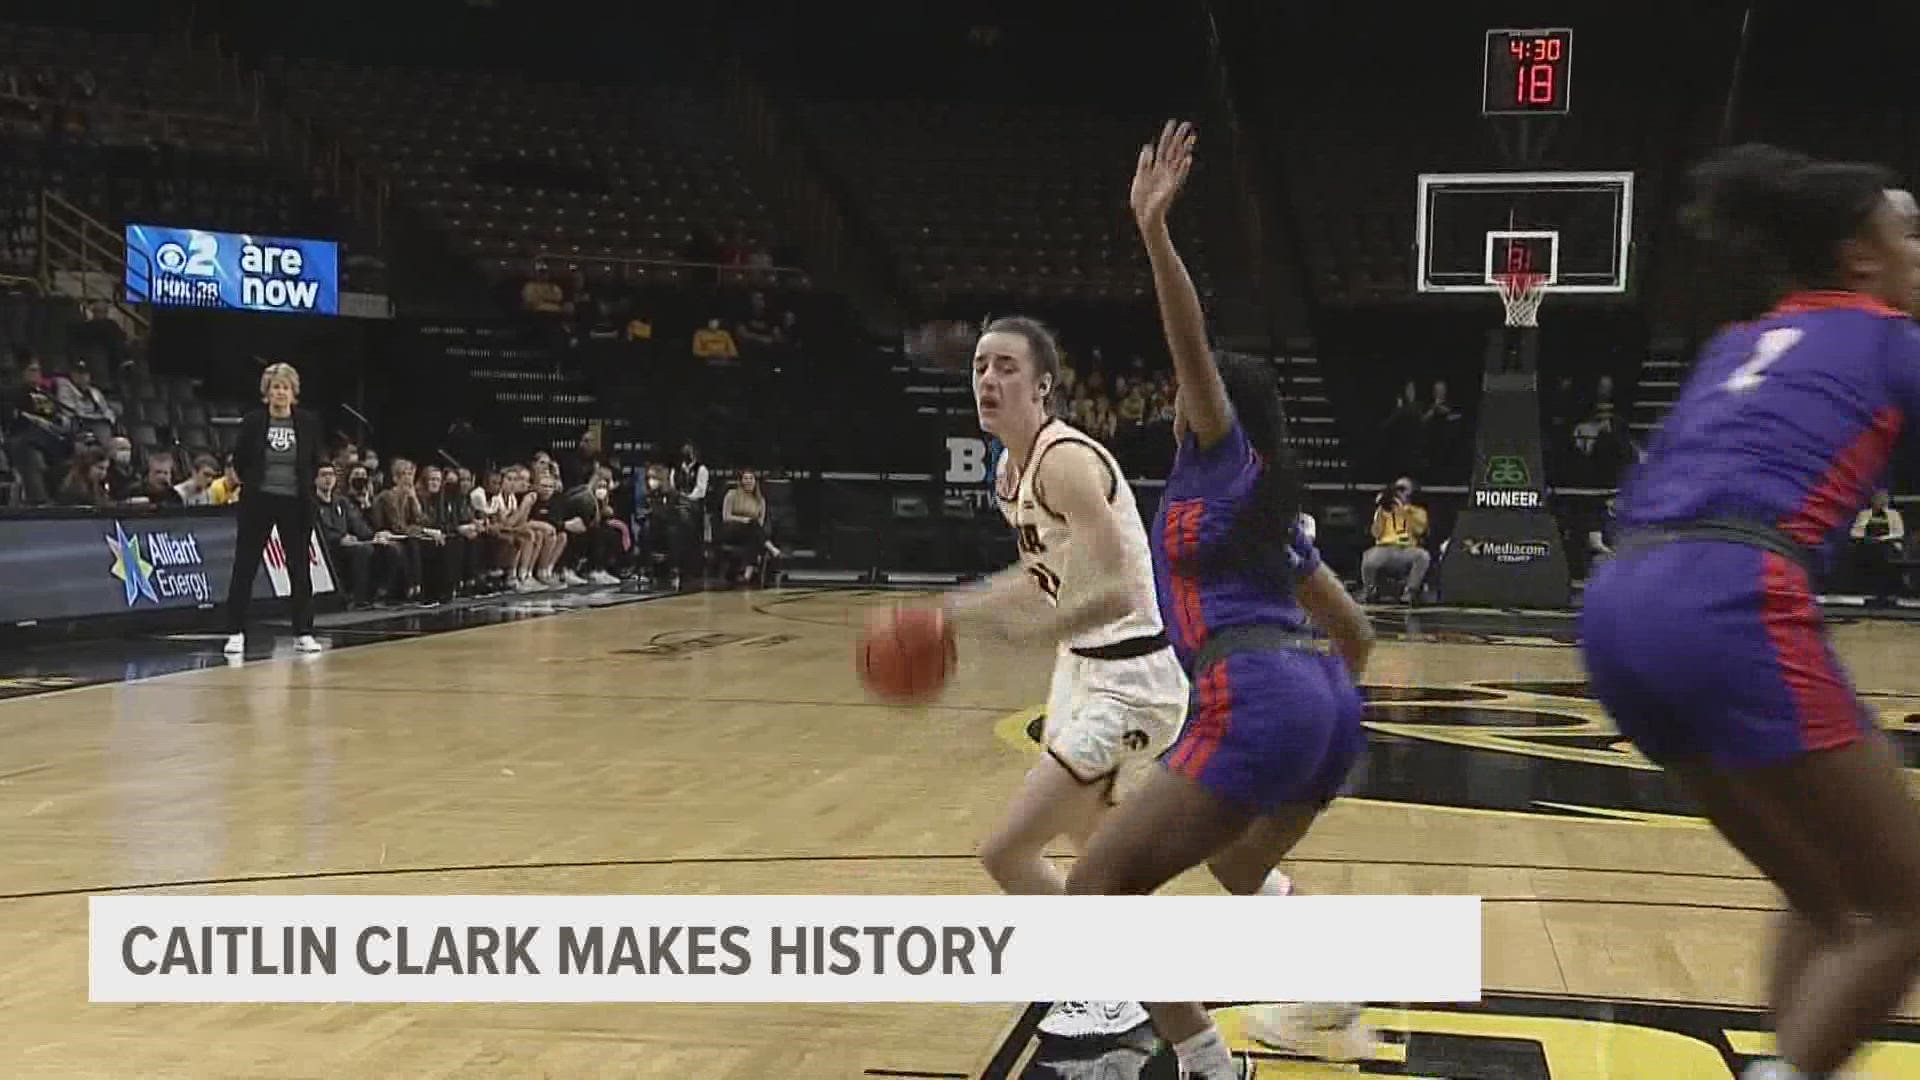 Clark broke the record for most points scored by a player in a women’s basketball game at Carver-Hawkeye Arena.